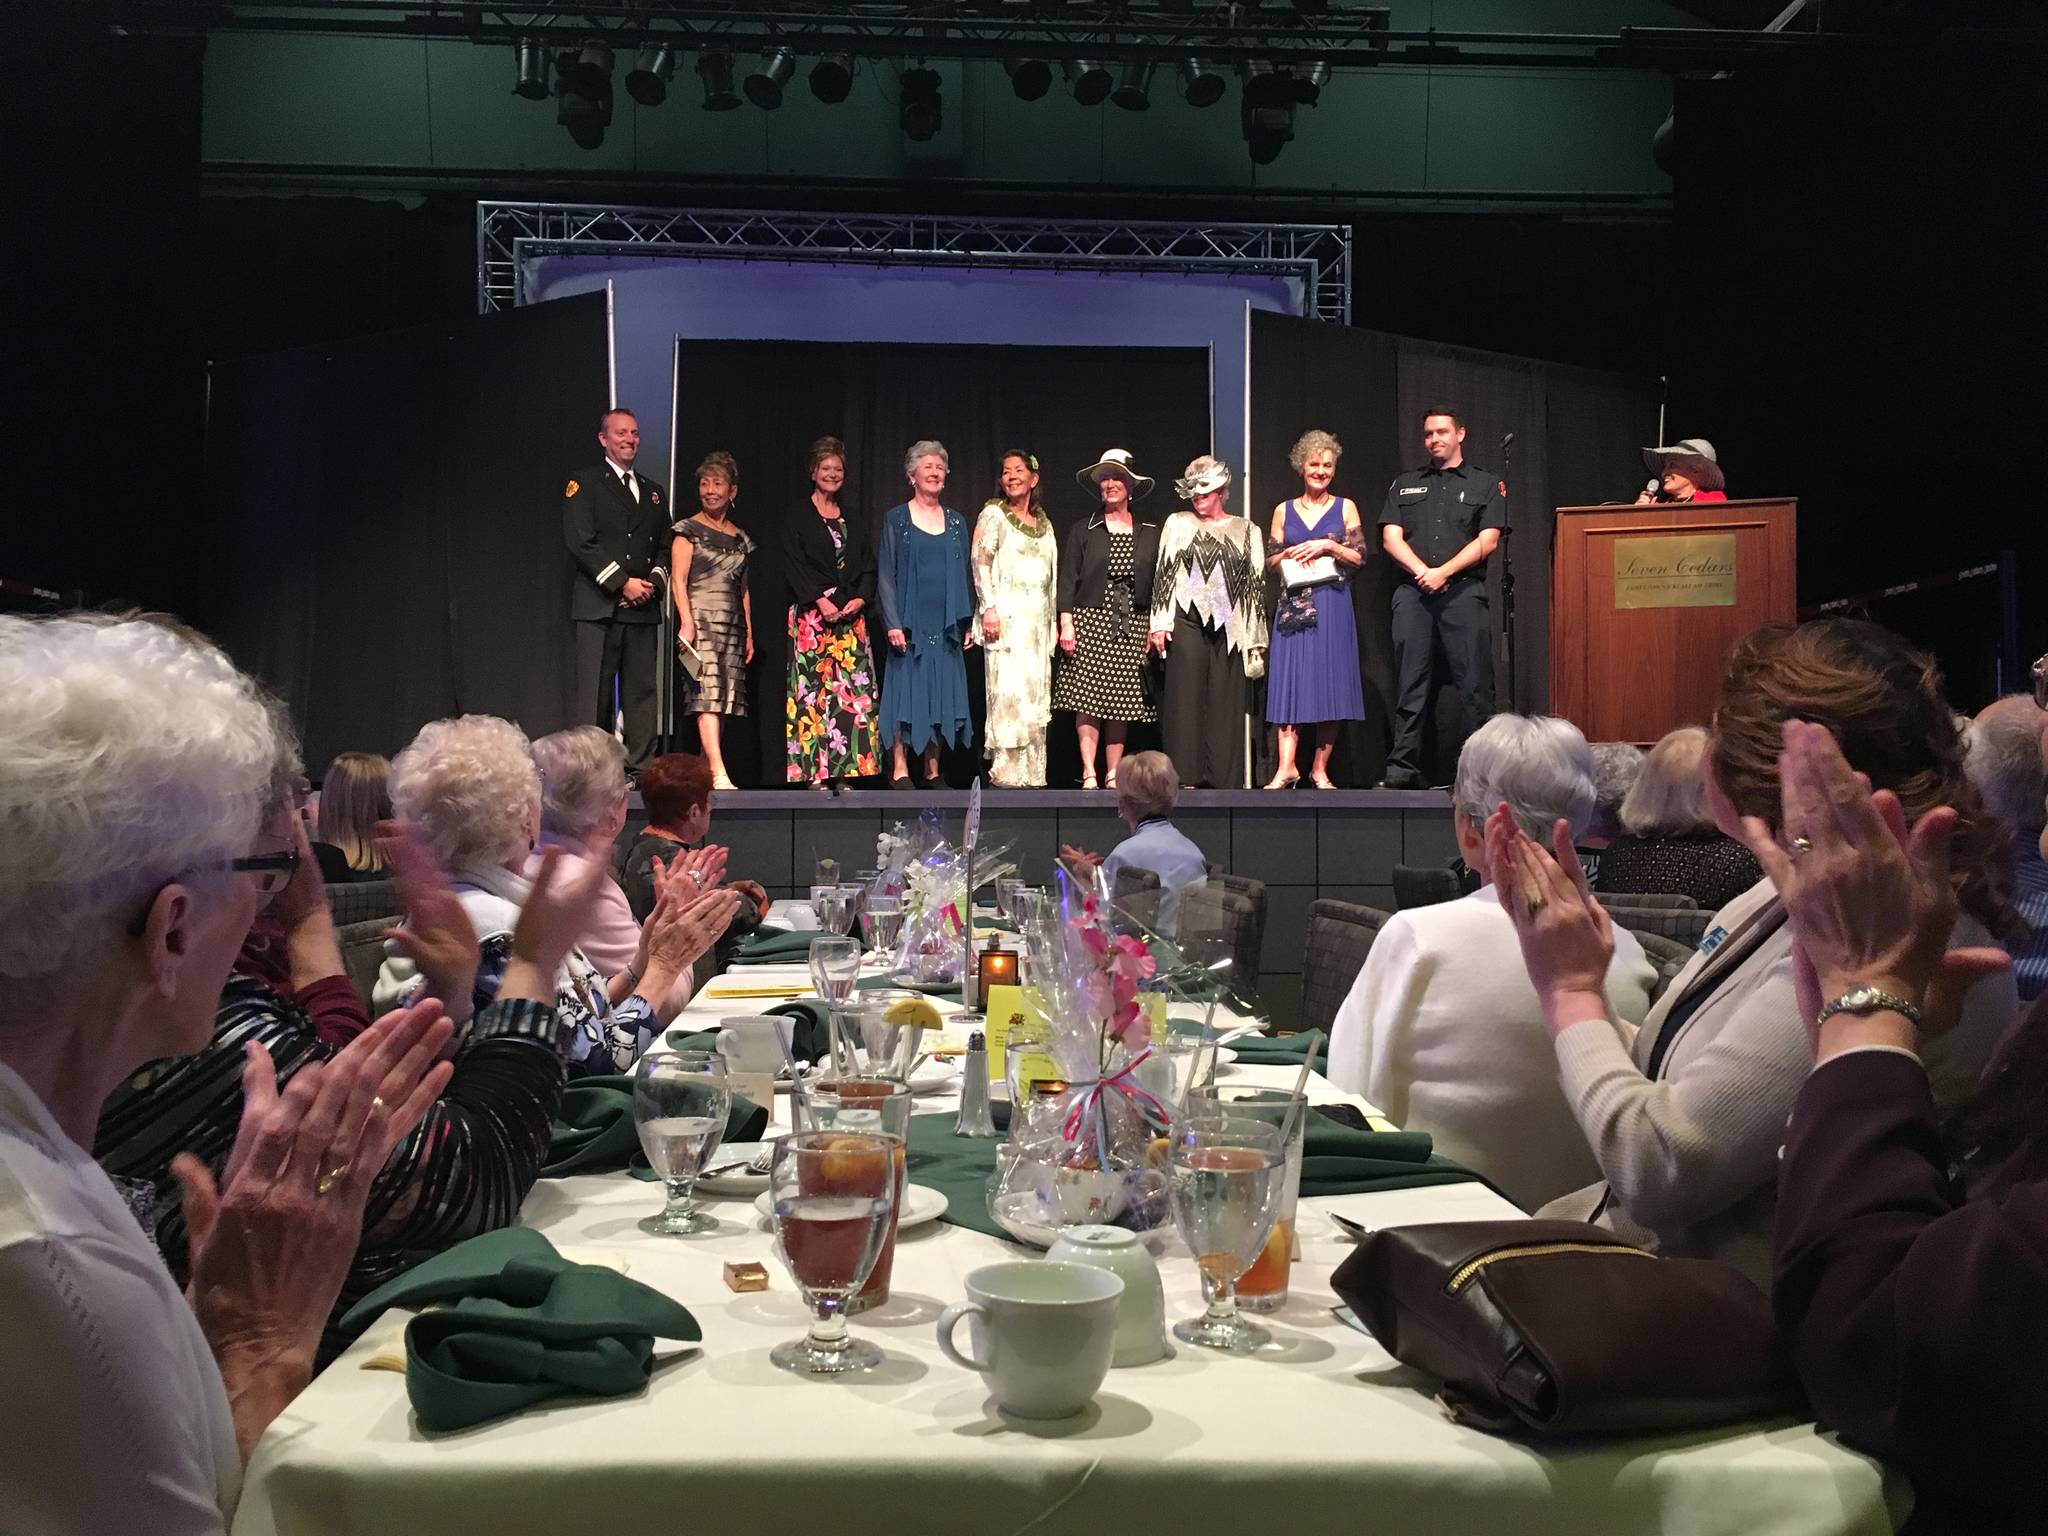 Participants of the Sequim-Dungeness Hospital Guild’s fashion show on May 23 stand together at its finale. Participants included, from left, Captain Derrell Sharp with Clallam County Fire District 3, Vicki Boyer, Jeanne Berger, Sue Cram, Elly Wilson, Wanda Bean, Dianne McIntosh, Mary Nesbitt, and firefighter/paramedic Casey Sires, along with fashion show announcer Thelma Sullock. Sequim Gazette photo by Matthew Nash